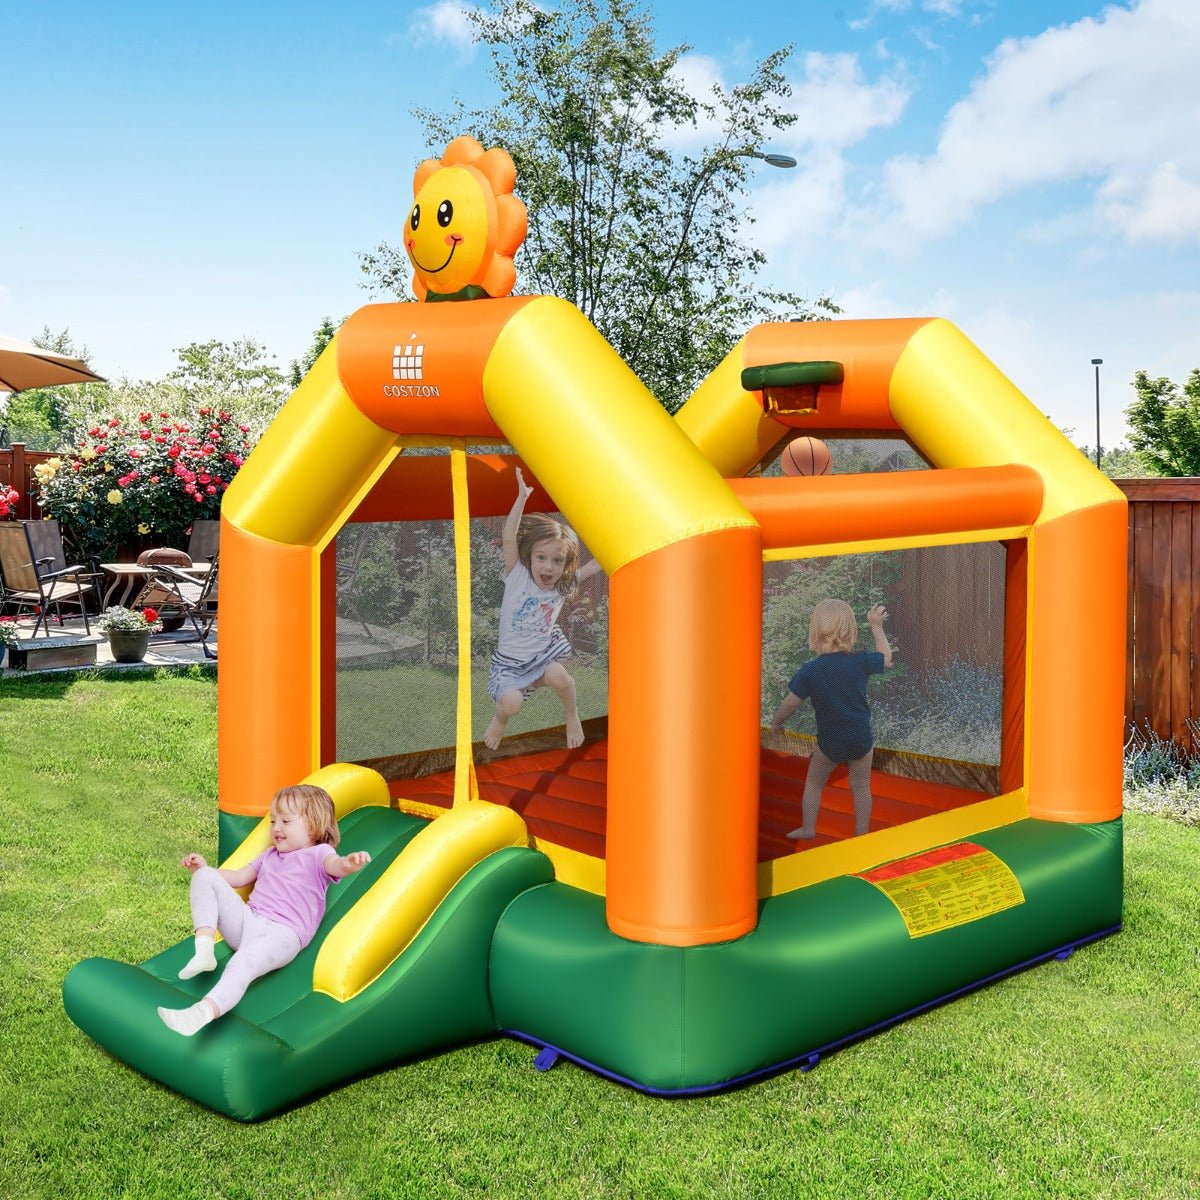 Sunflower Inflatable Bounce House with Slide - Outdoor Fun for Kids